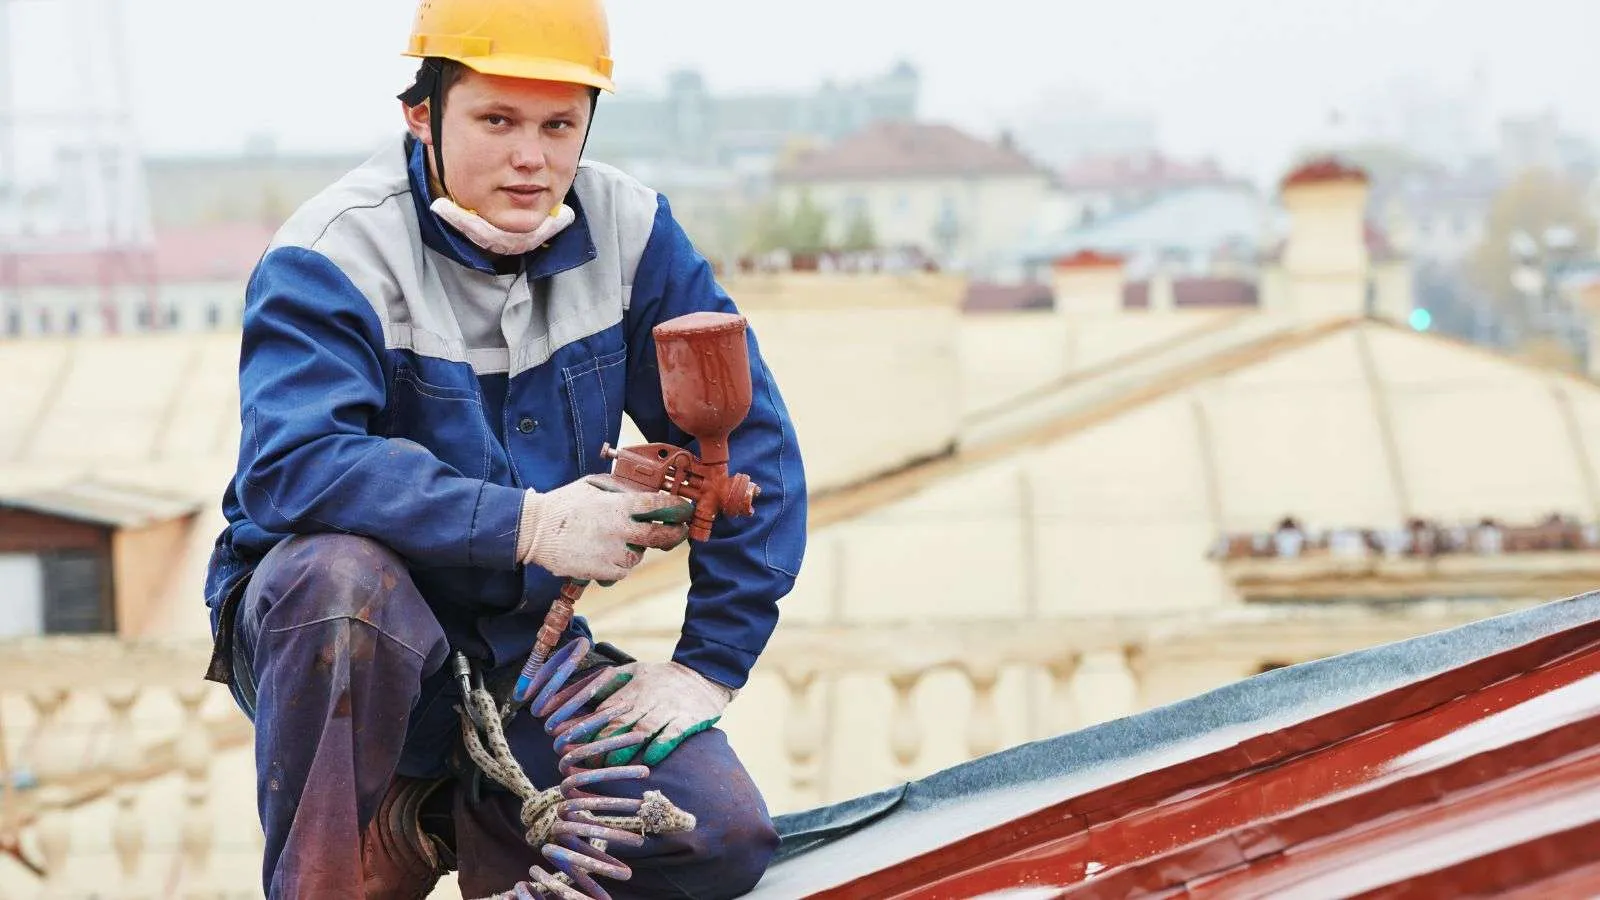 how roof painting affects property value - bighomeprojects.com